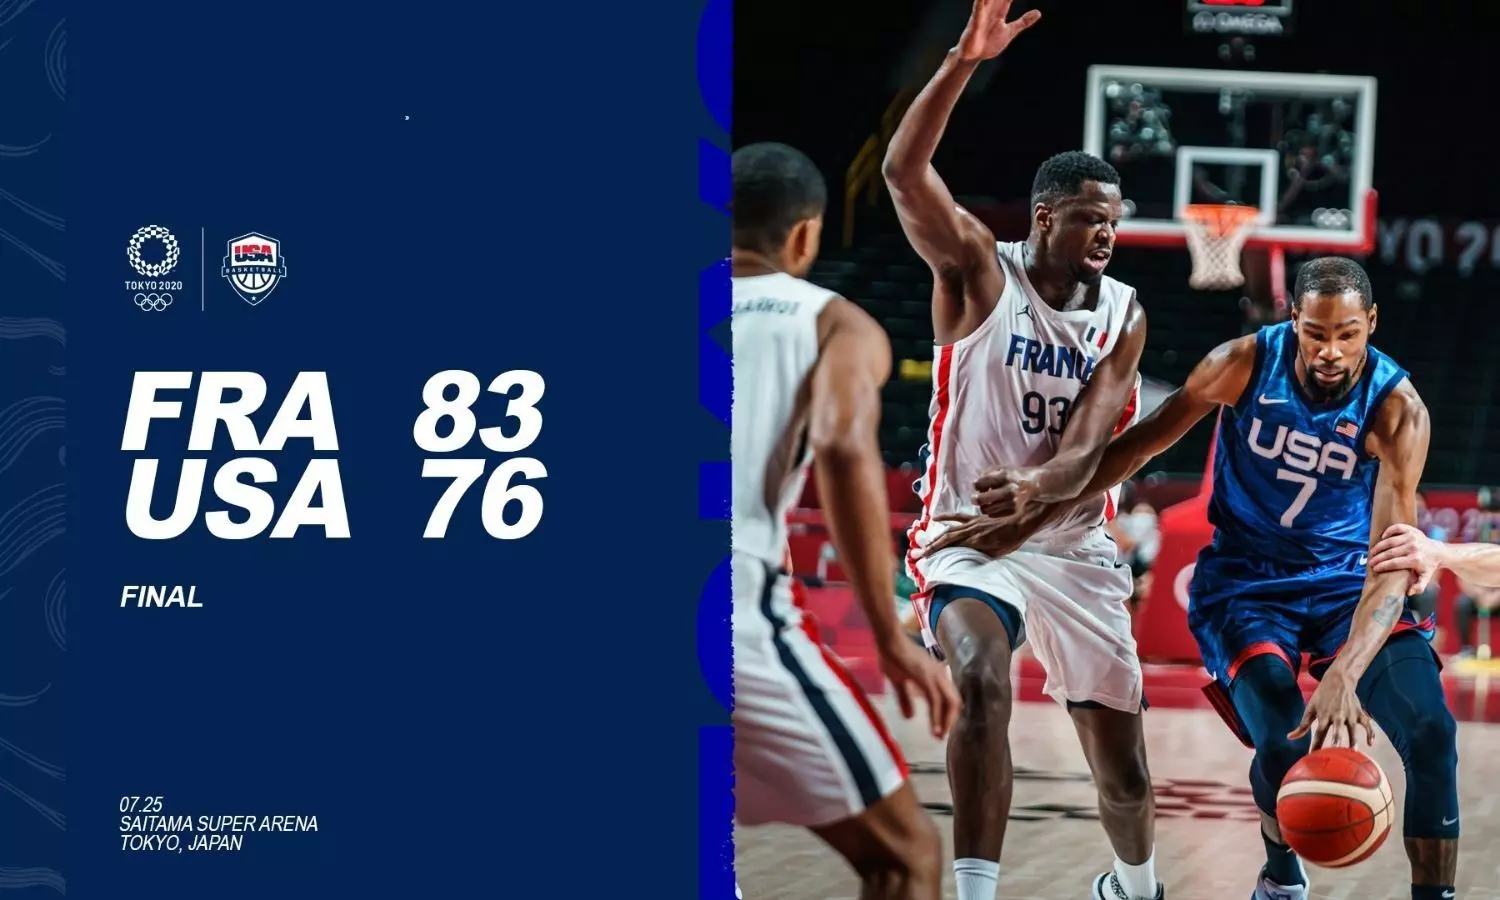 Tokyo Olympics Men S Basketball Team Usa Off To A Disastrous Start To Their Campaign After Dropping The First Game To France